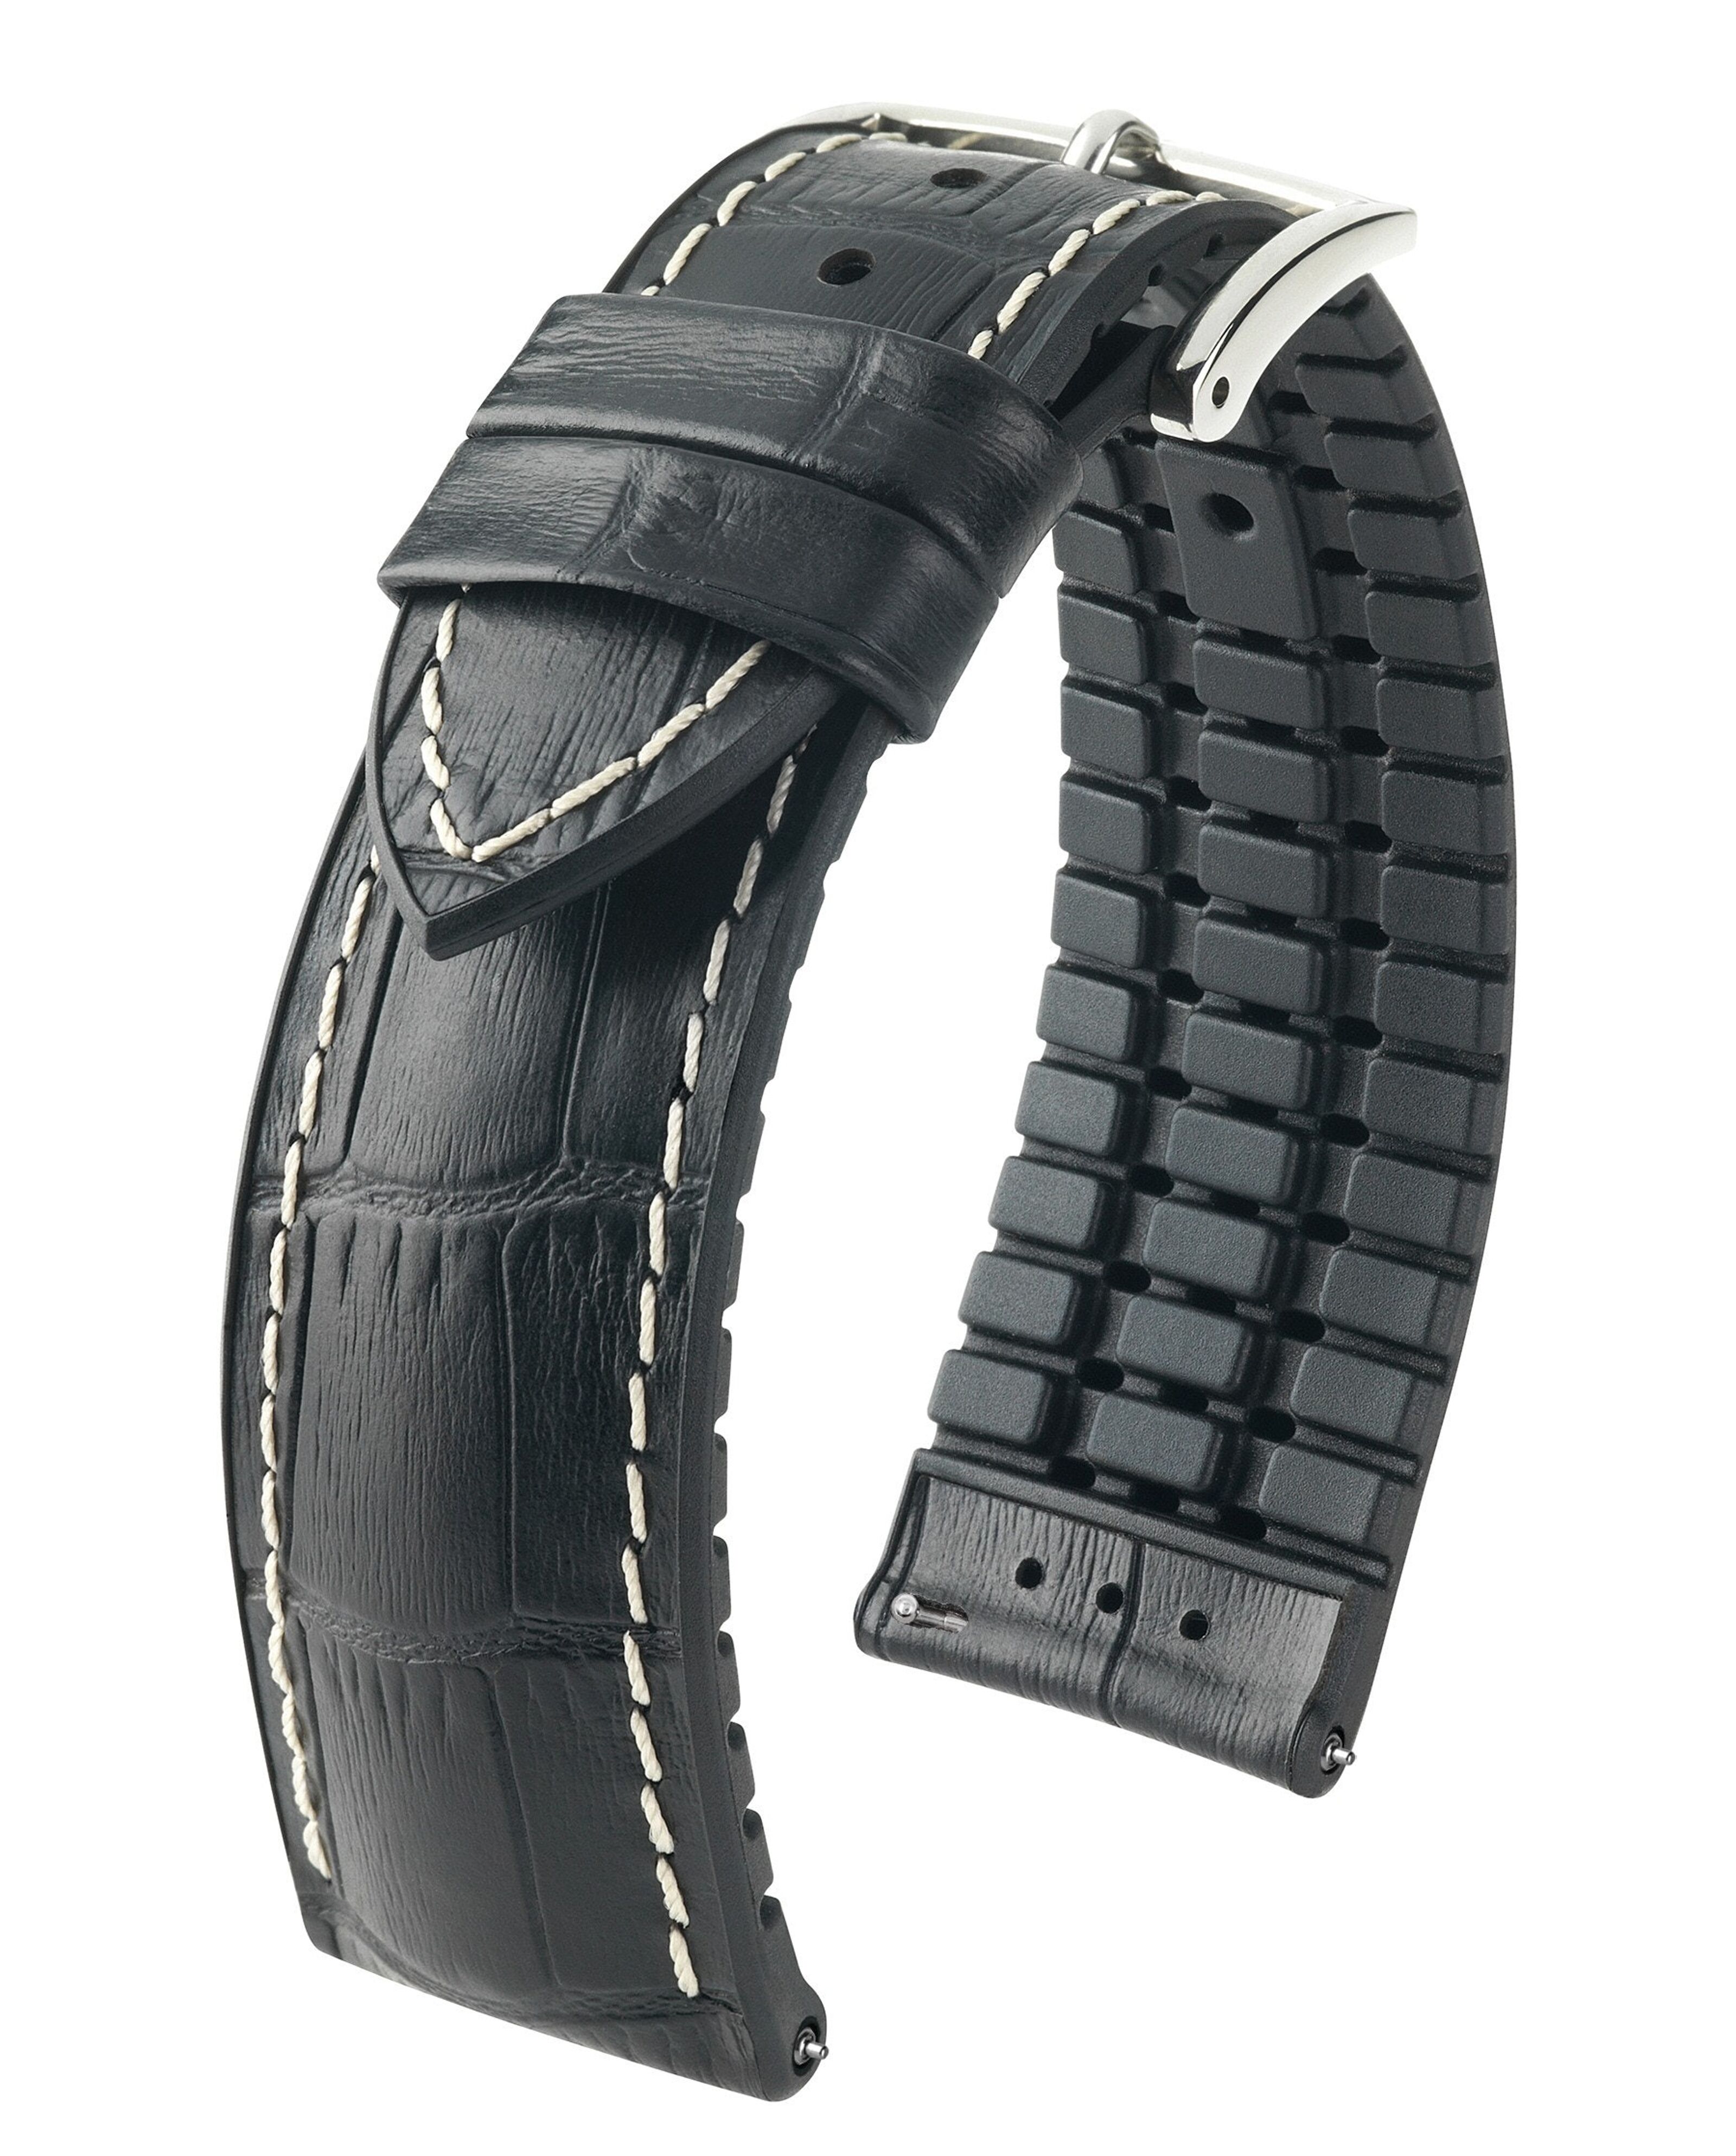 watch available wholesale and - for embossing core calfskin HIRSCH sporty - 24mm - attachment rubber Italian the 20mm, & L 22mm strap George of women men - - Buy - widths in with black alligator